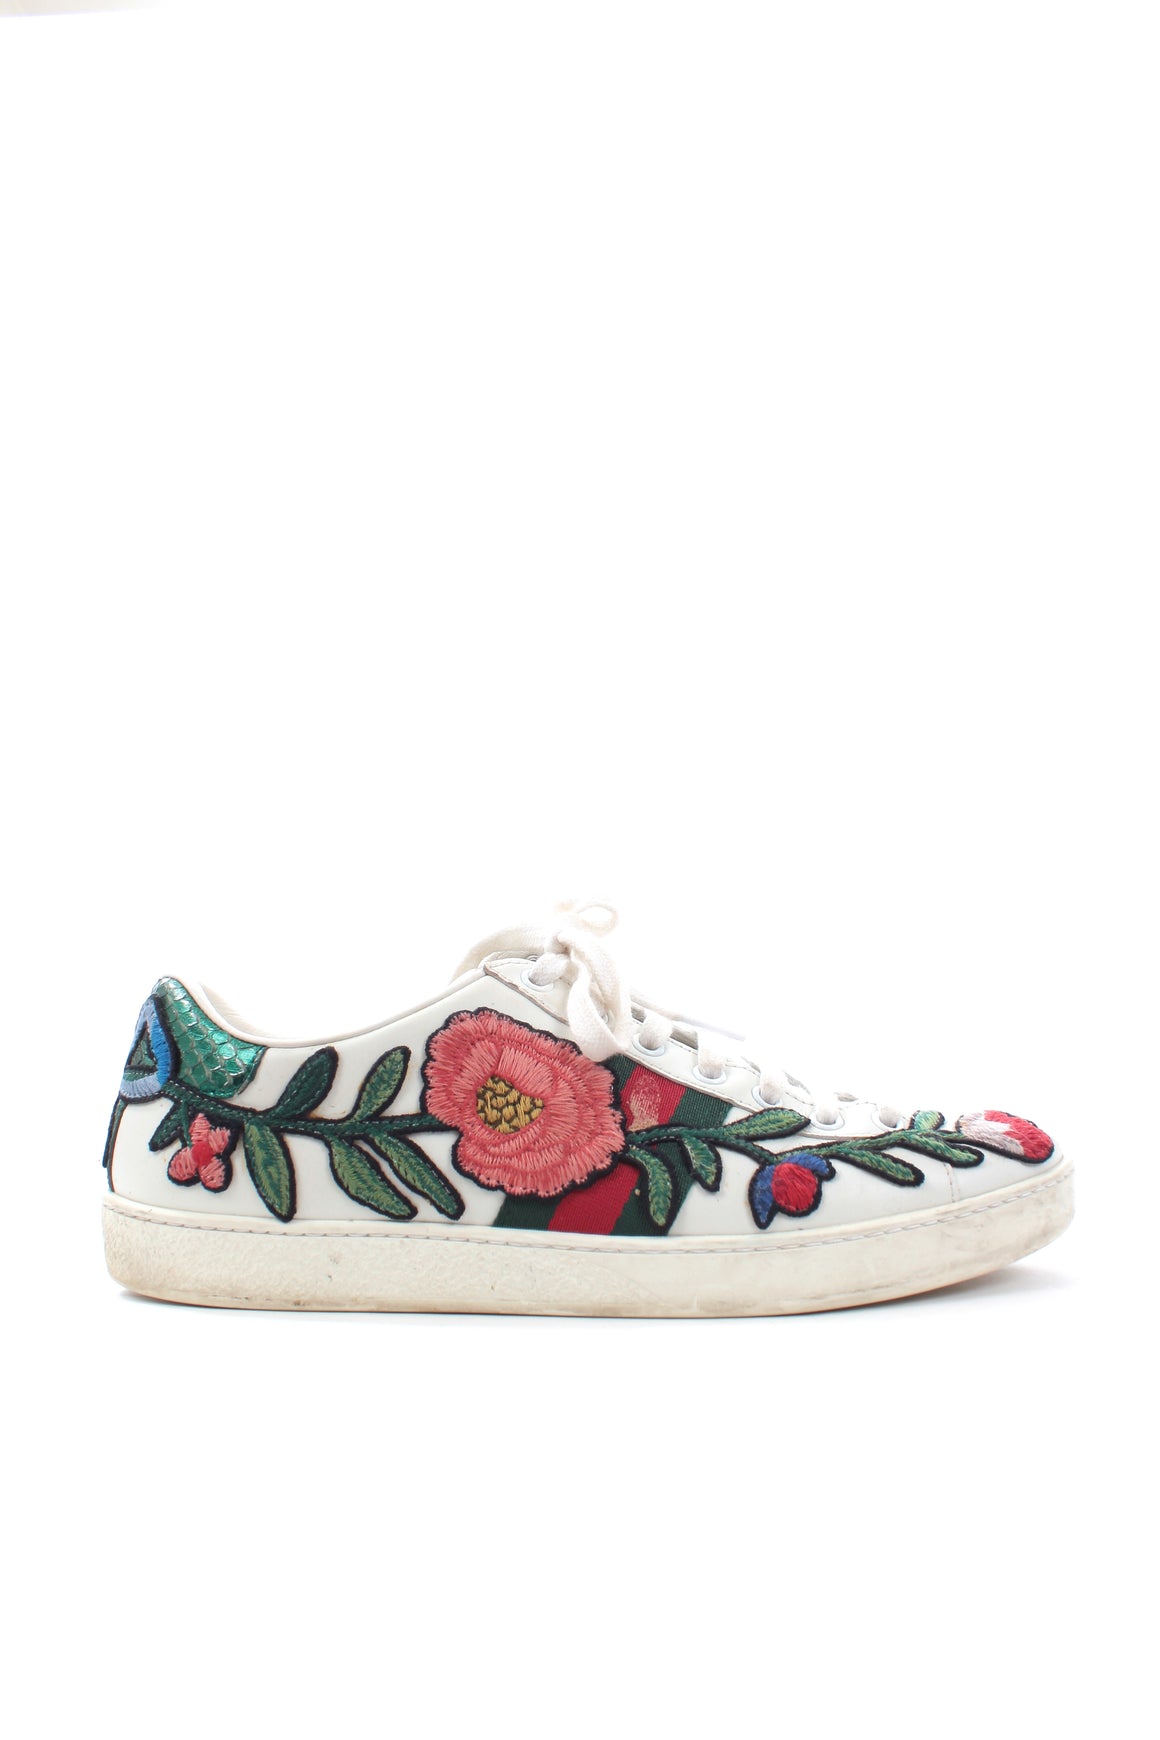 Gucci Ace Watersnake-Trimmed Floral Appliquéd Leather Sneakers